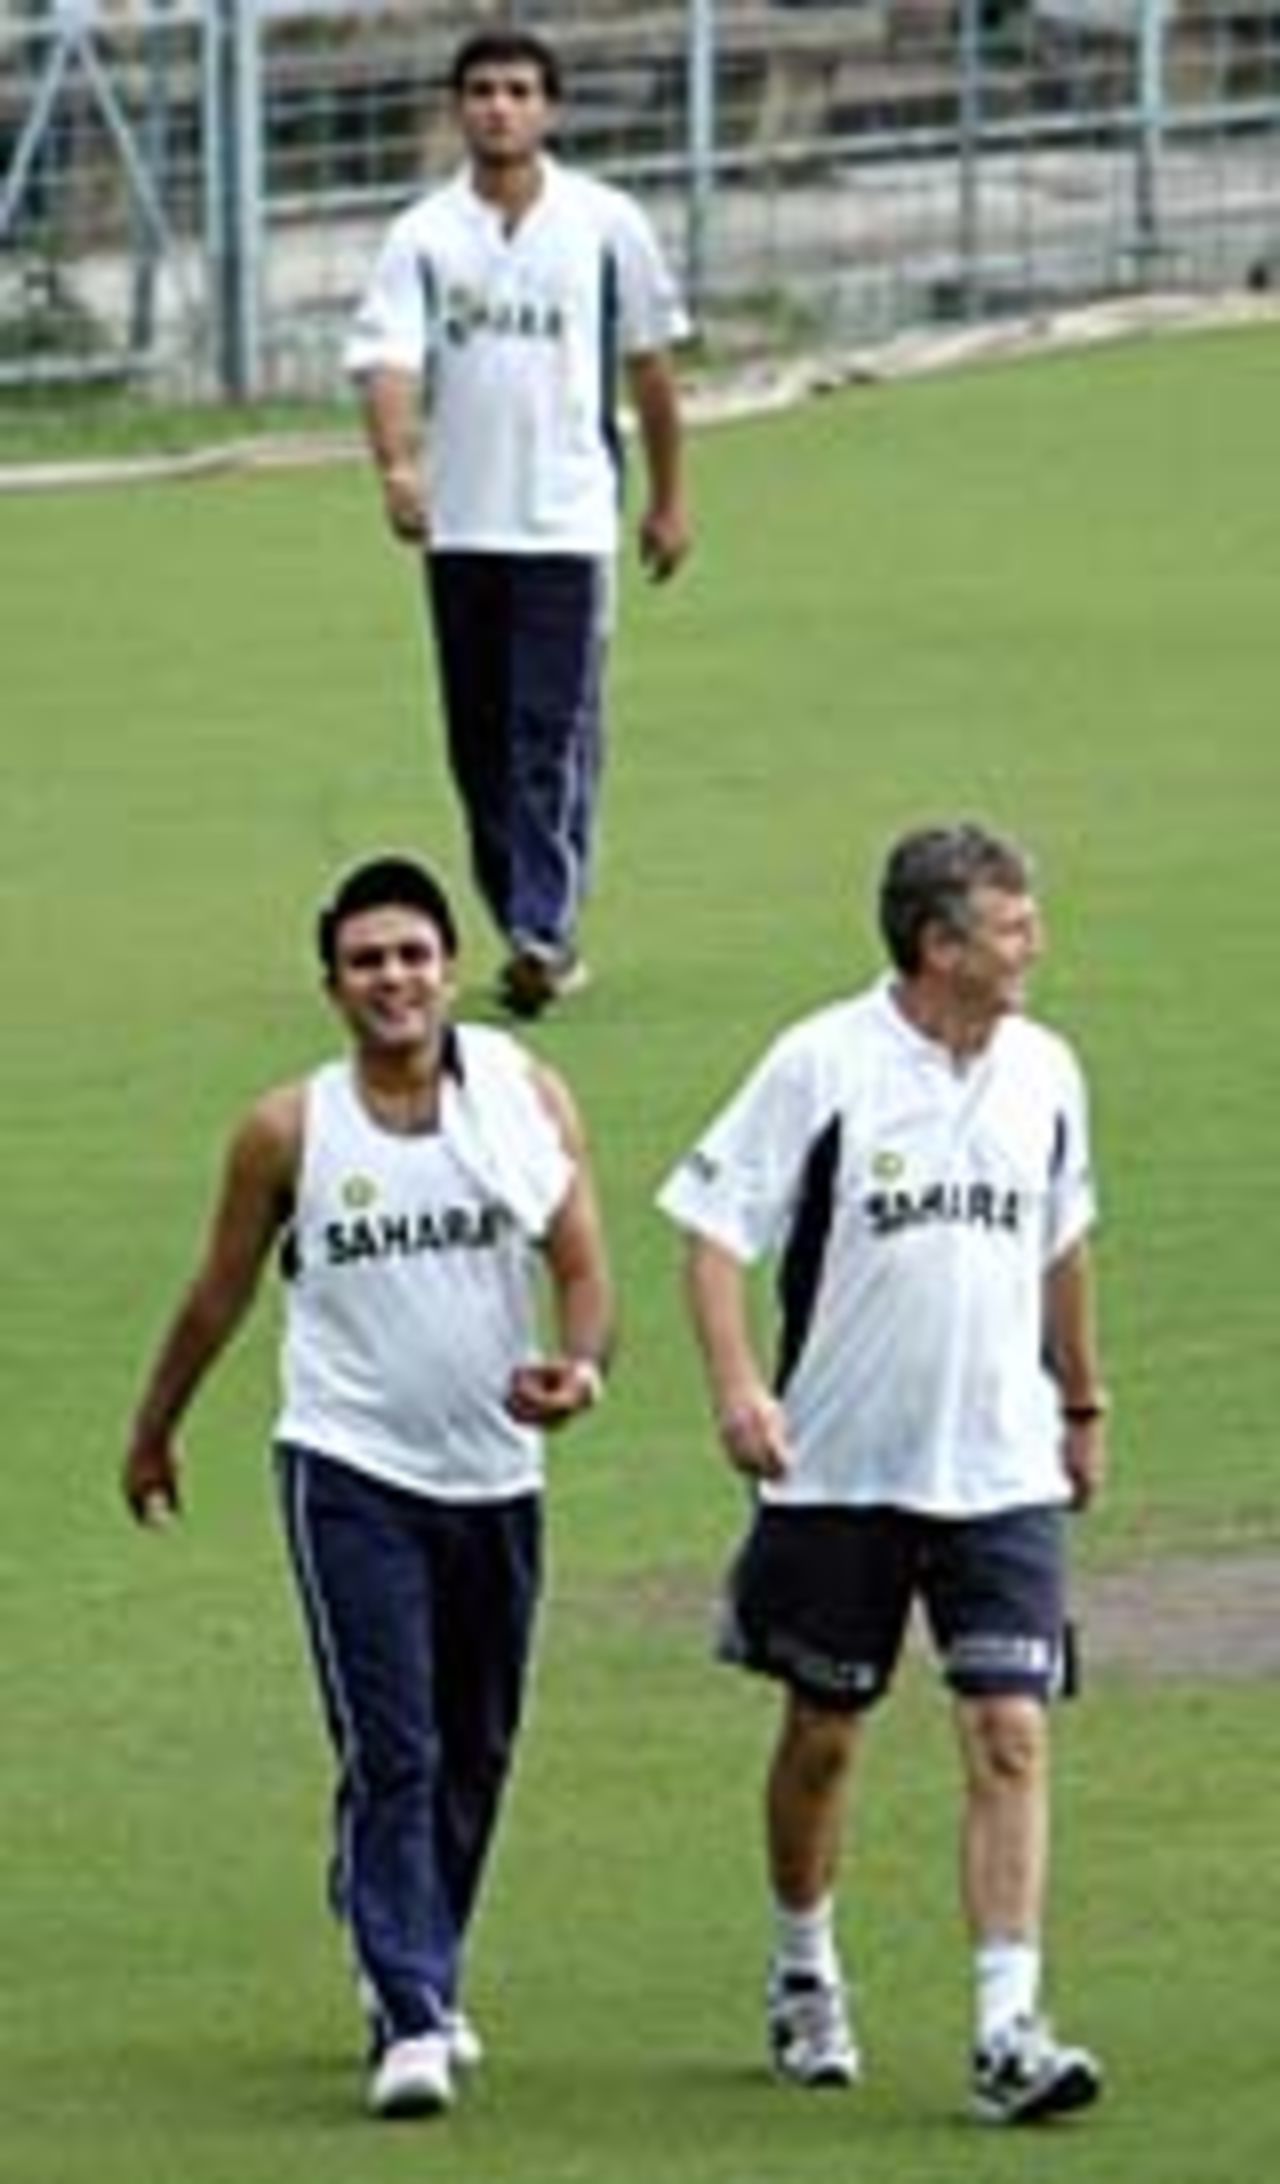 Virender Sehwag and India's coach John Wright share a light moment as they walk ahead of team captain Sourav Ganguly (C) following an indoor physical training session during the first day of a conditioning camp at Eden Gardens, March 7, 2004